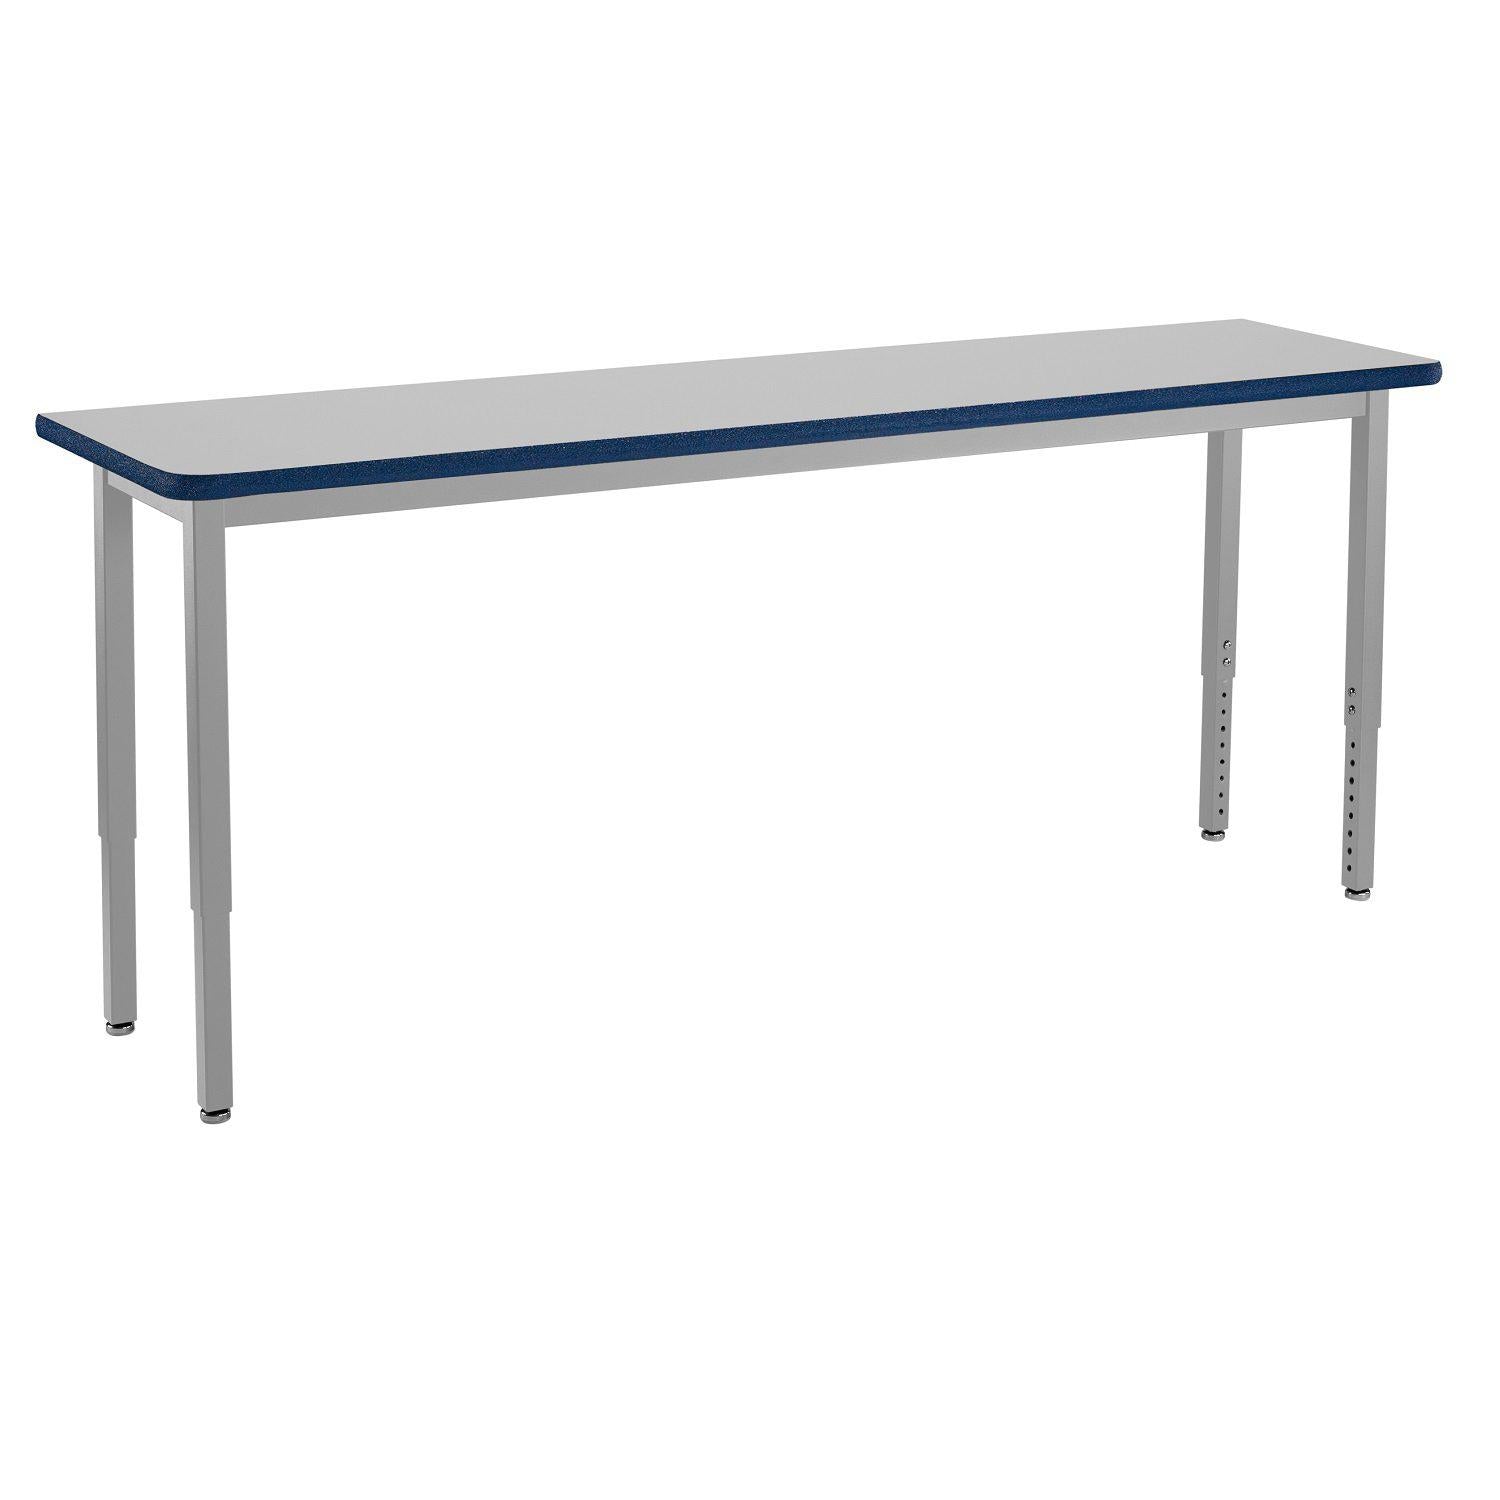 Heavy-Duty Height-Adjustable Utility Table, Soft Grey Frame, 18" x 72", Supreme High-Pressure Laminate Top with Black ProtectEdge